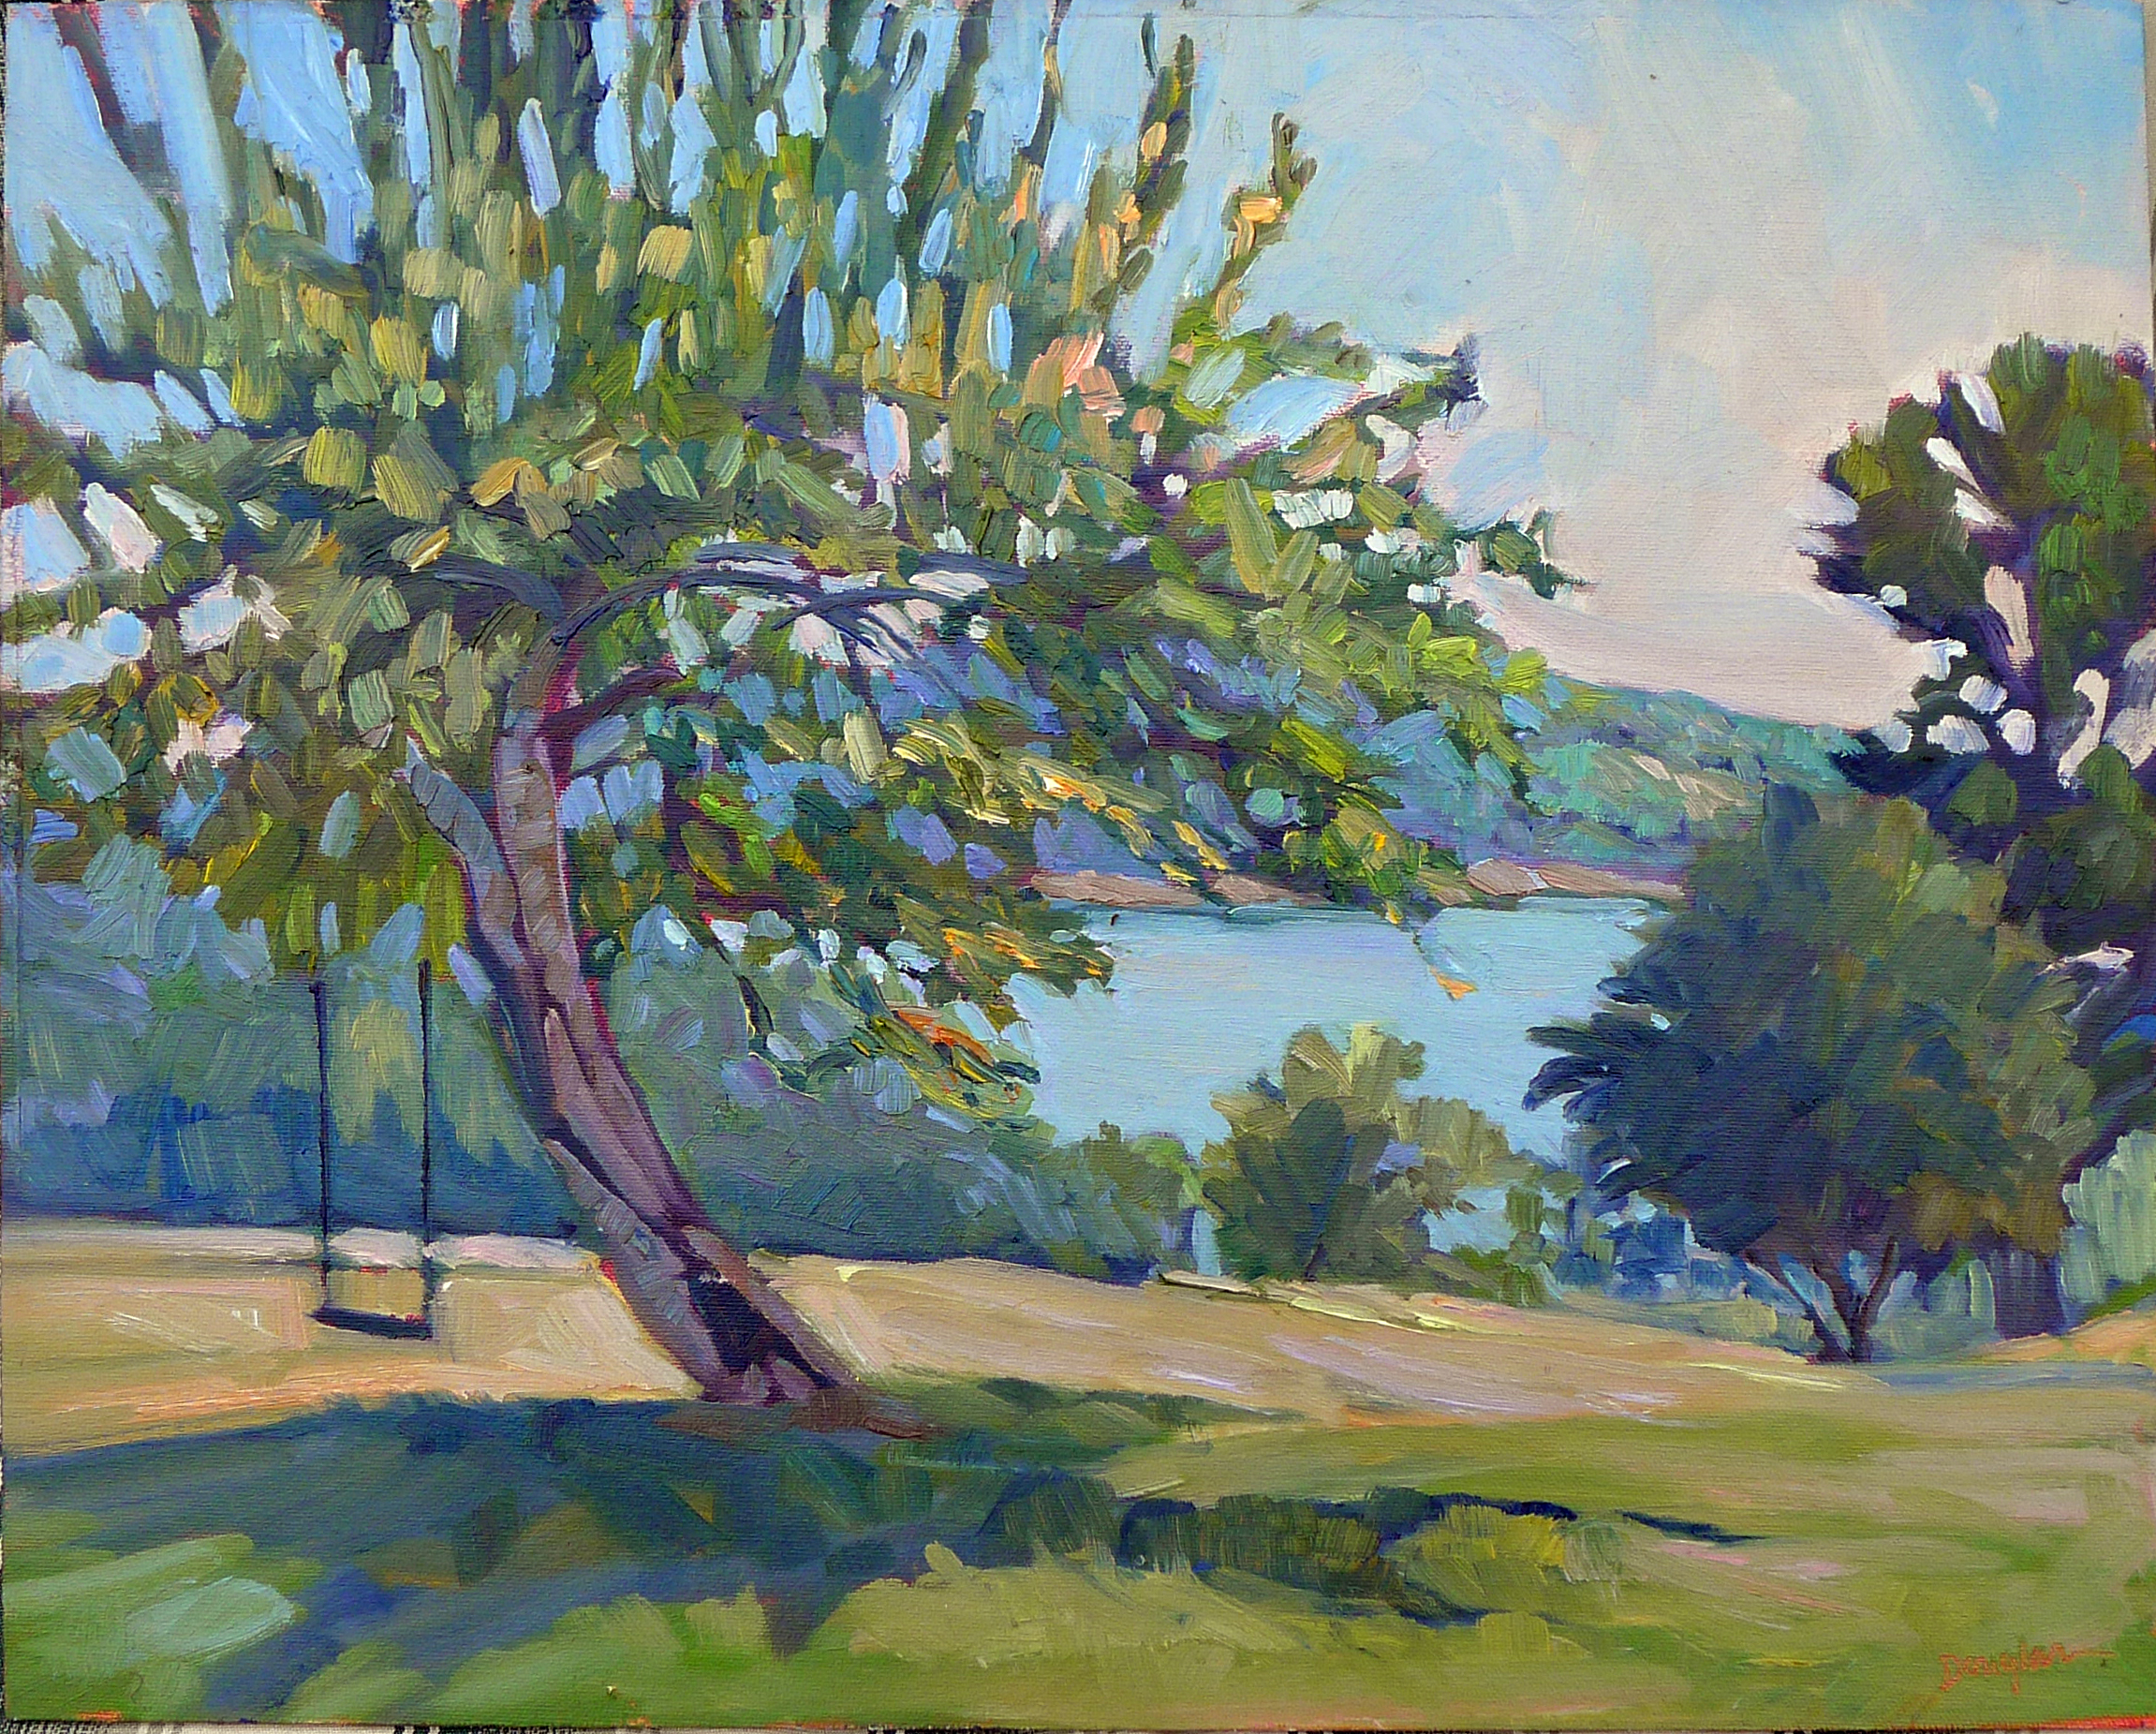 Apple Tree with Swing, 16X20, oil on archival canvasboard, $2029 framed includes shipping and handling in continental US.